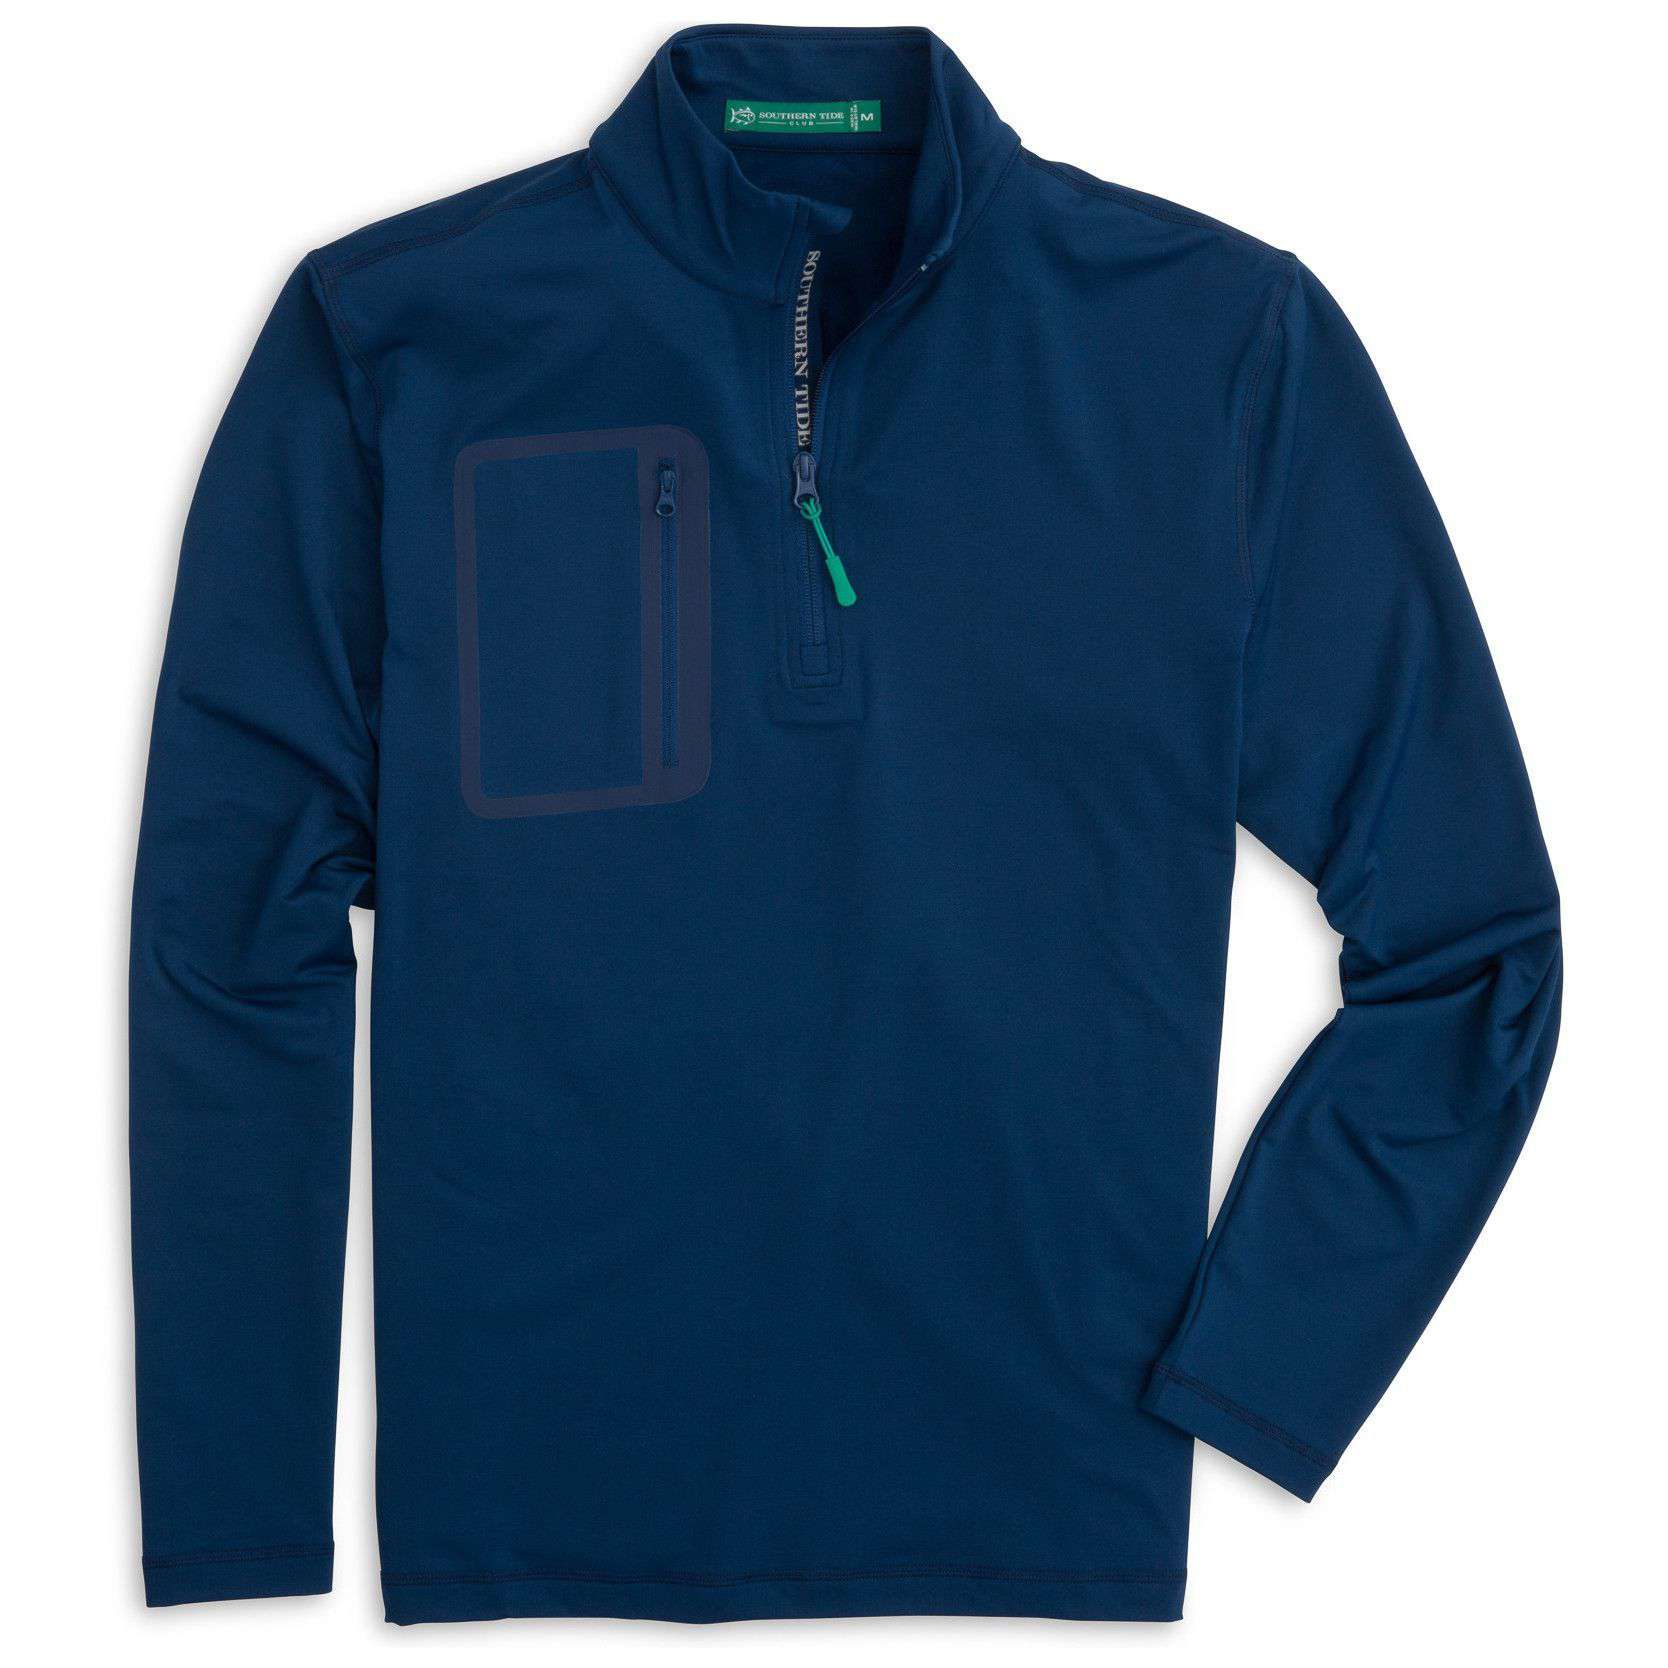 Sporting Performance 1/4 Zip in Yacht Blue by Southern Tide - Country Club Prep